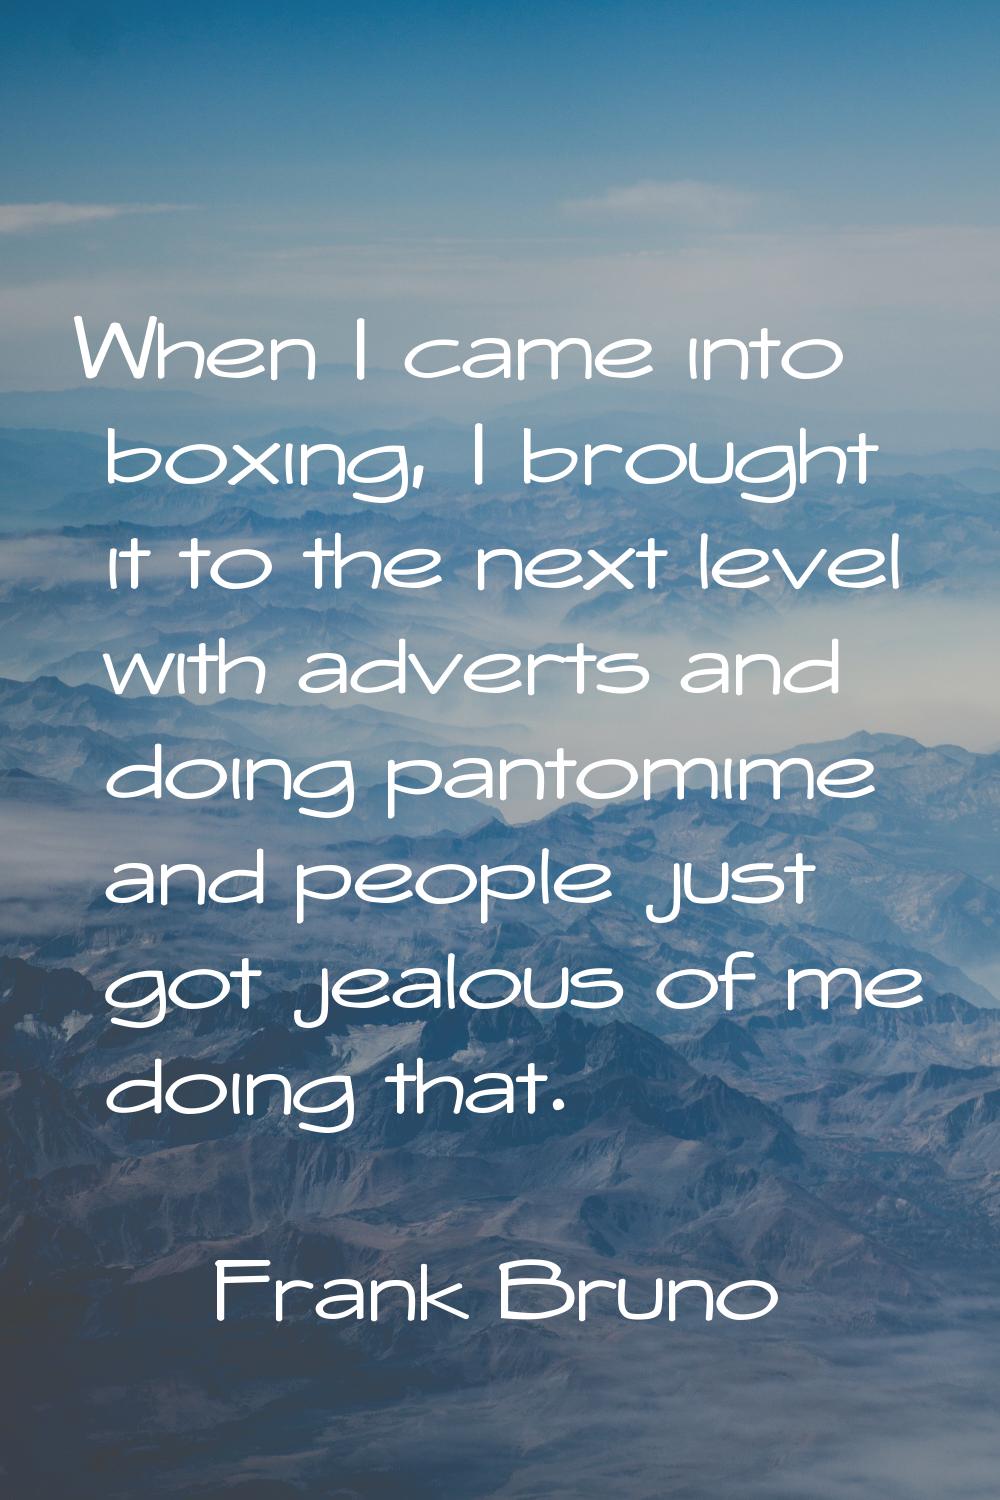 When I came into boxing, I brought it to the next level with adverts and doing pantomime and people